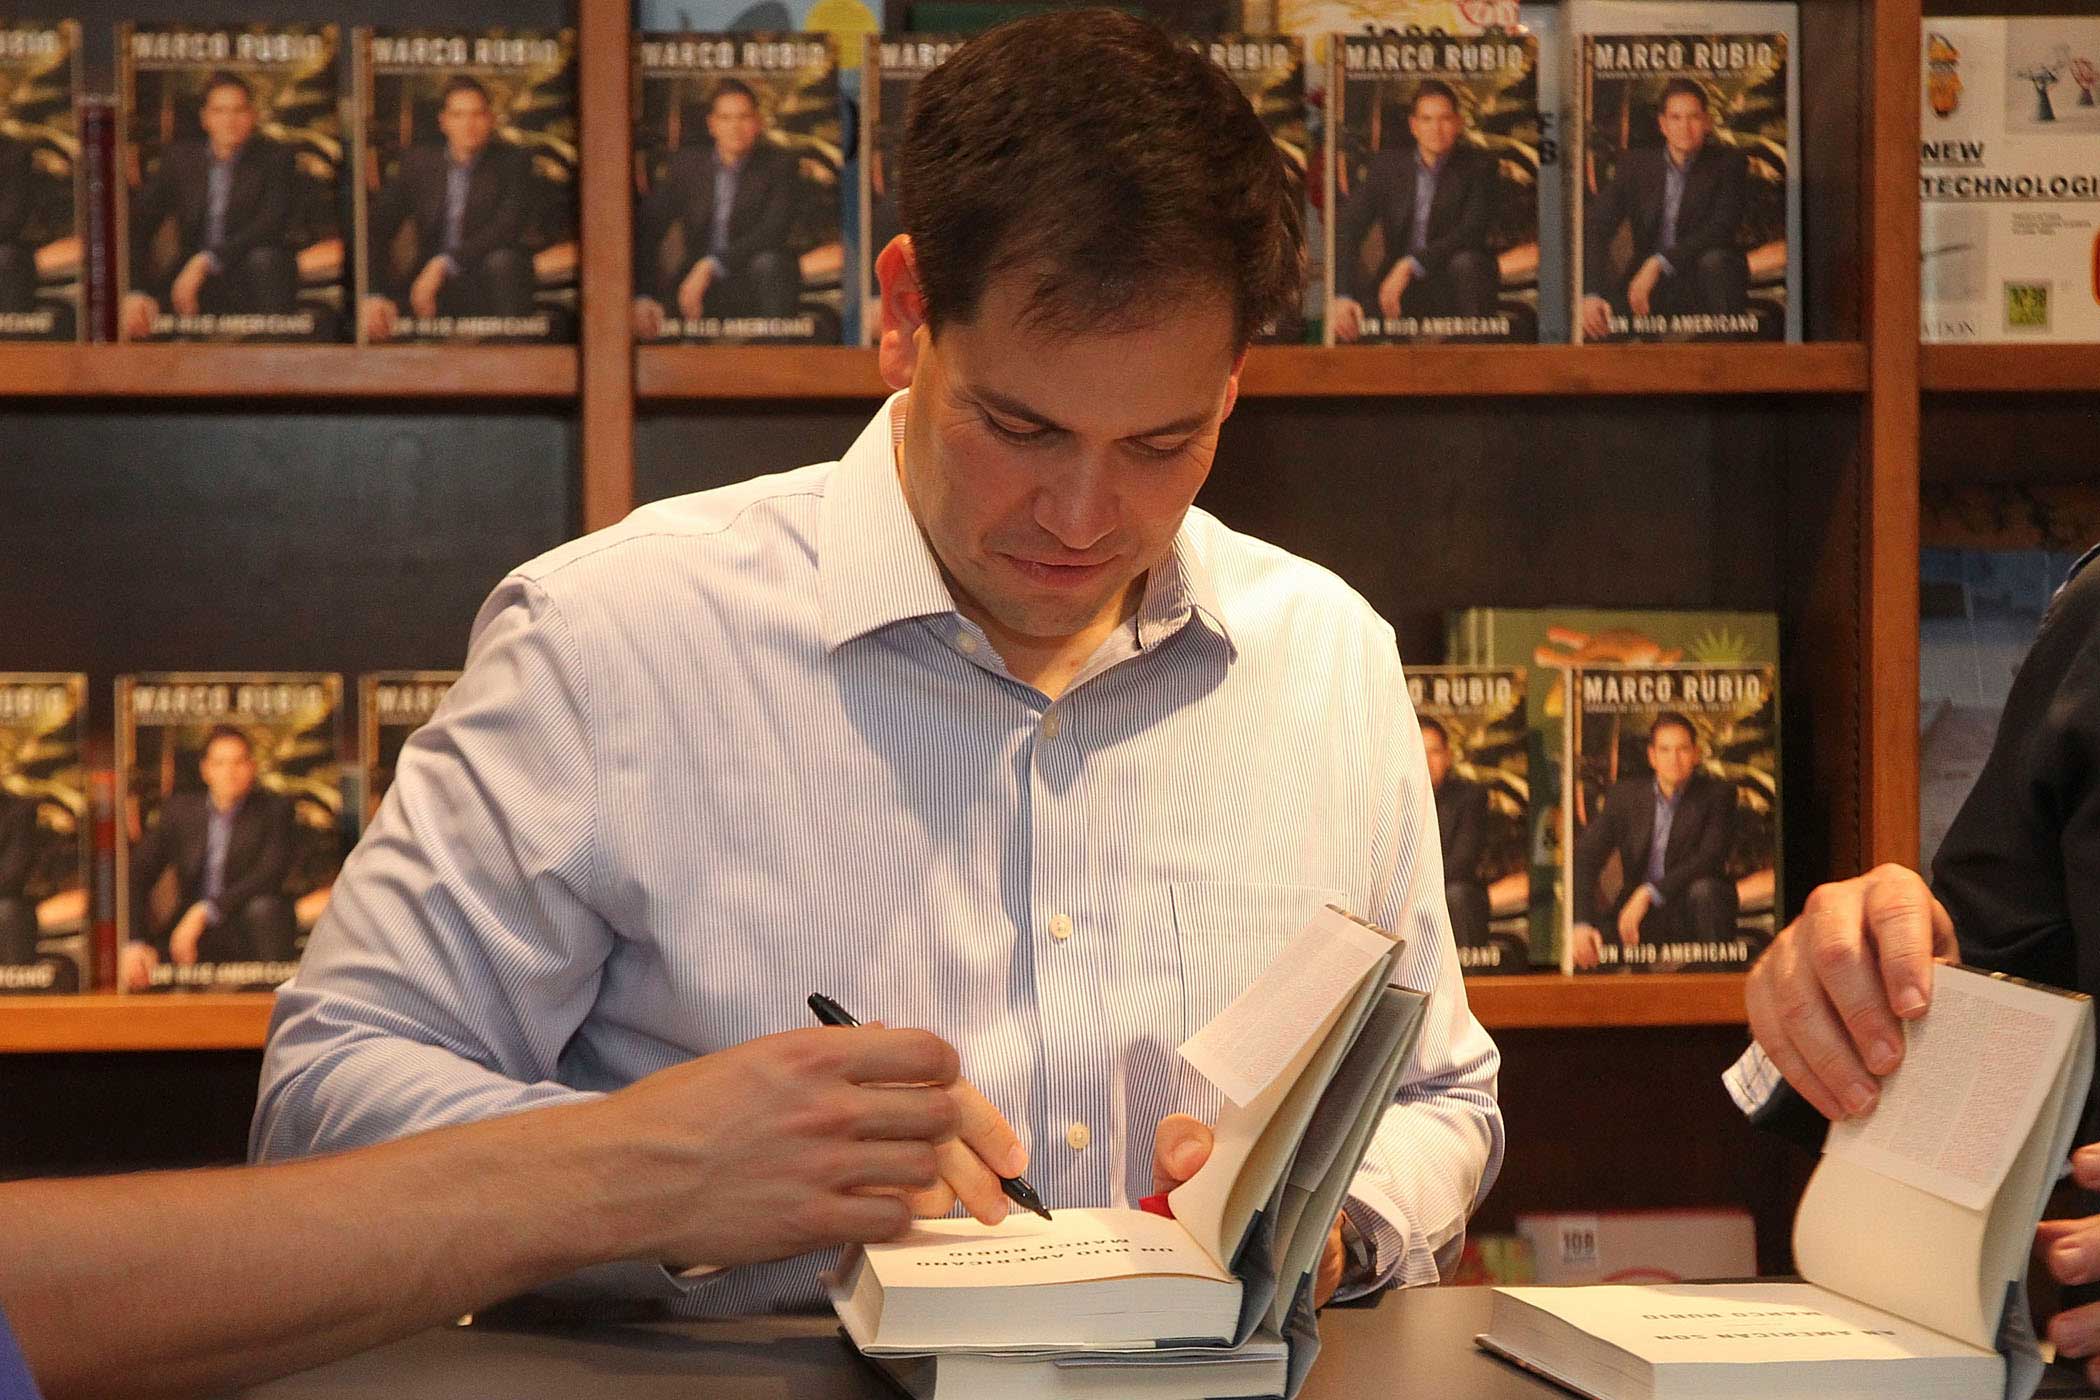 Senator Marco Rubio Book Signing at Books And Books